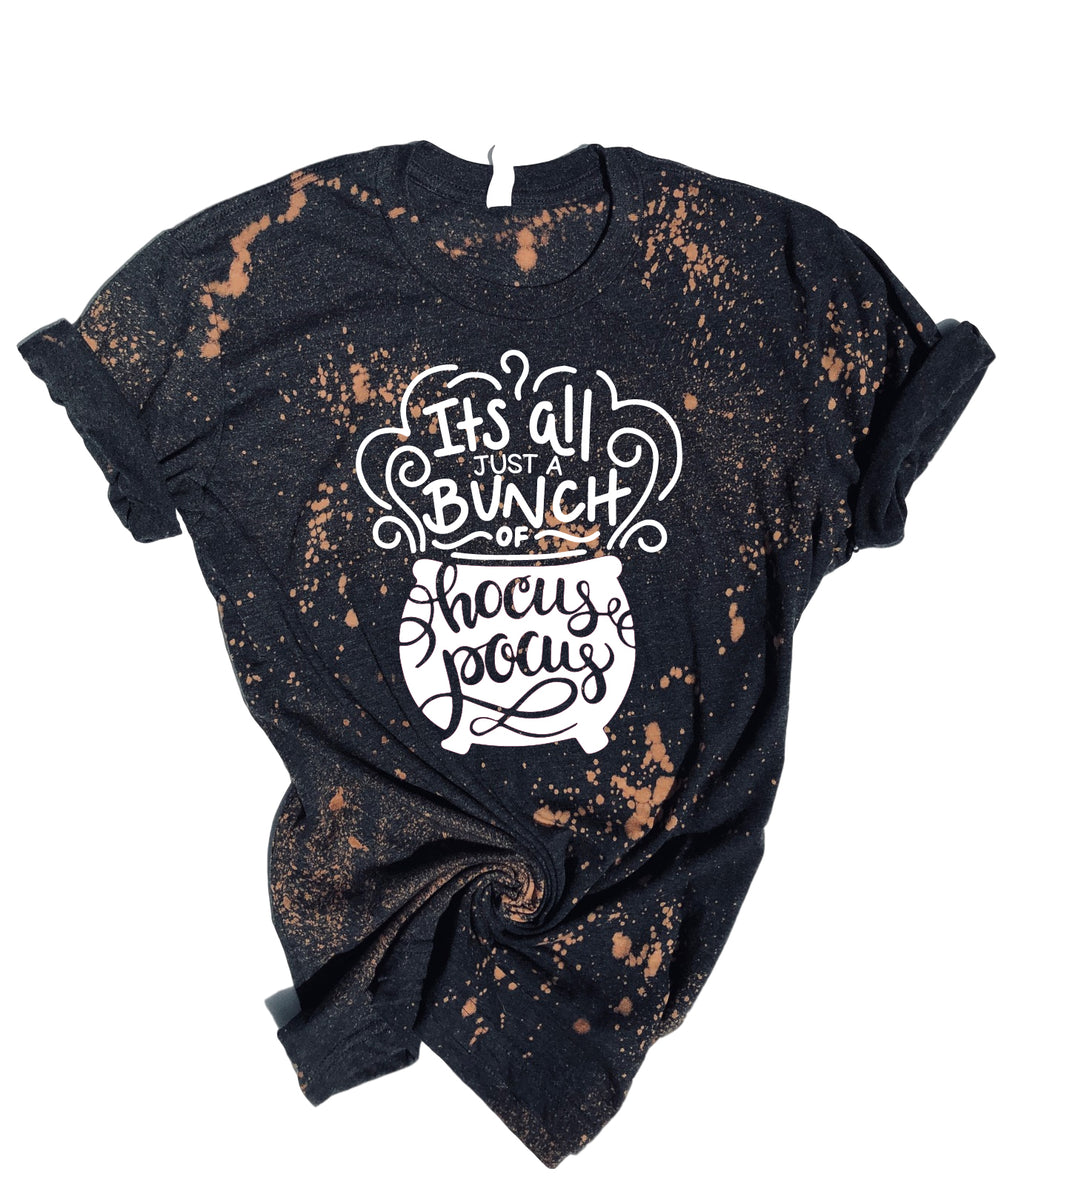 Hocus Pocus Bleached Shirt Prime - Jolly Family Gifts